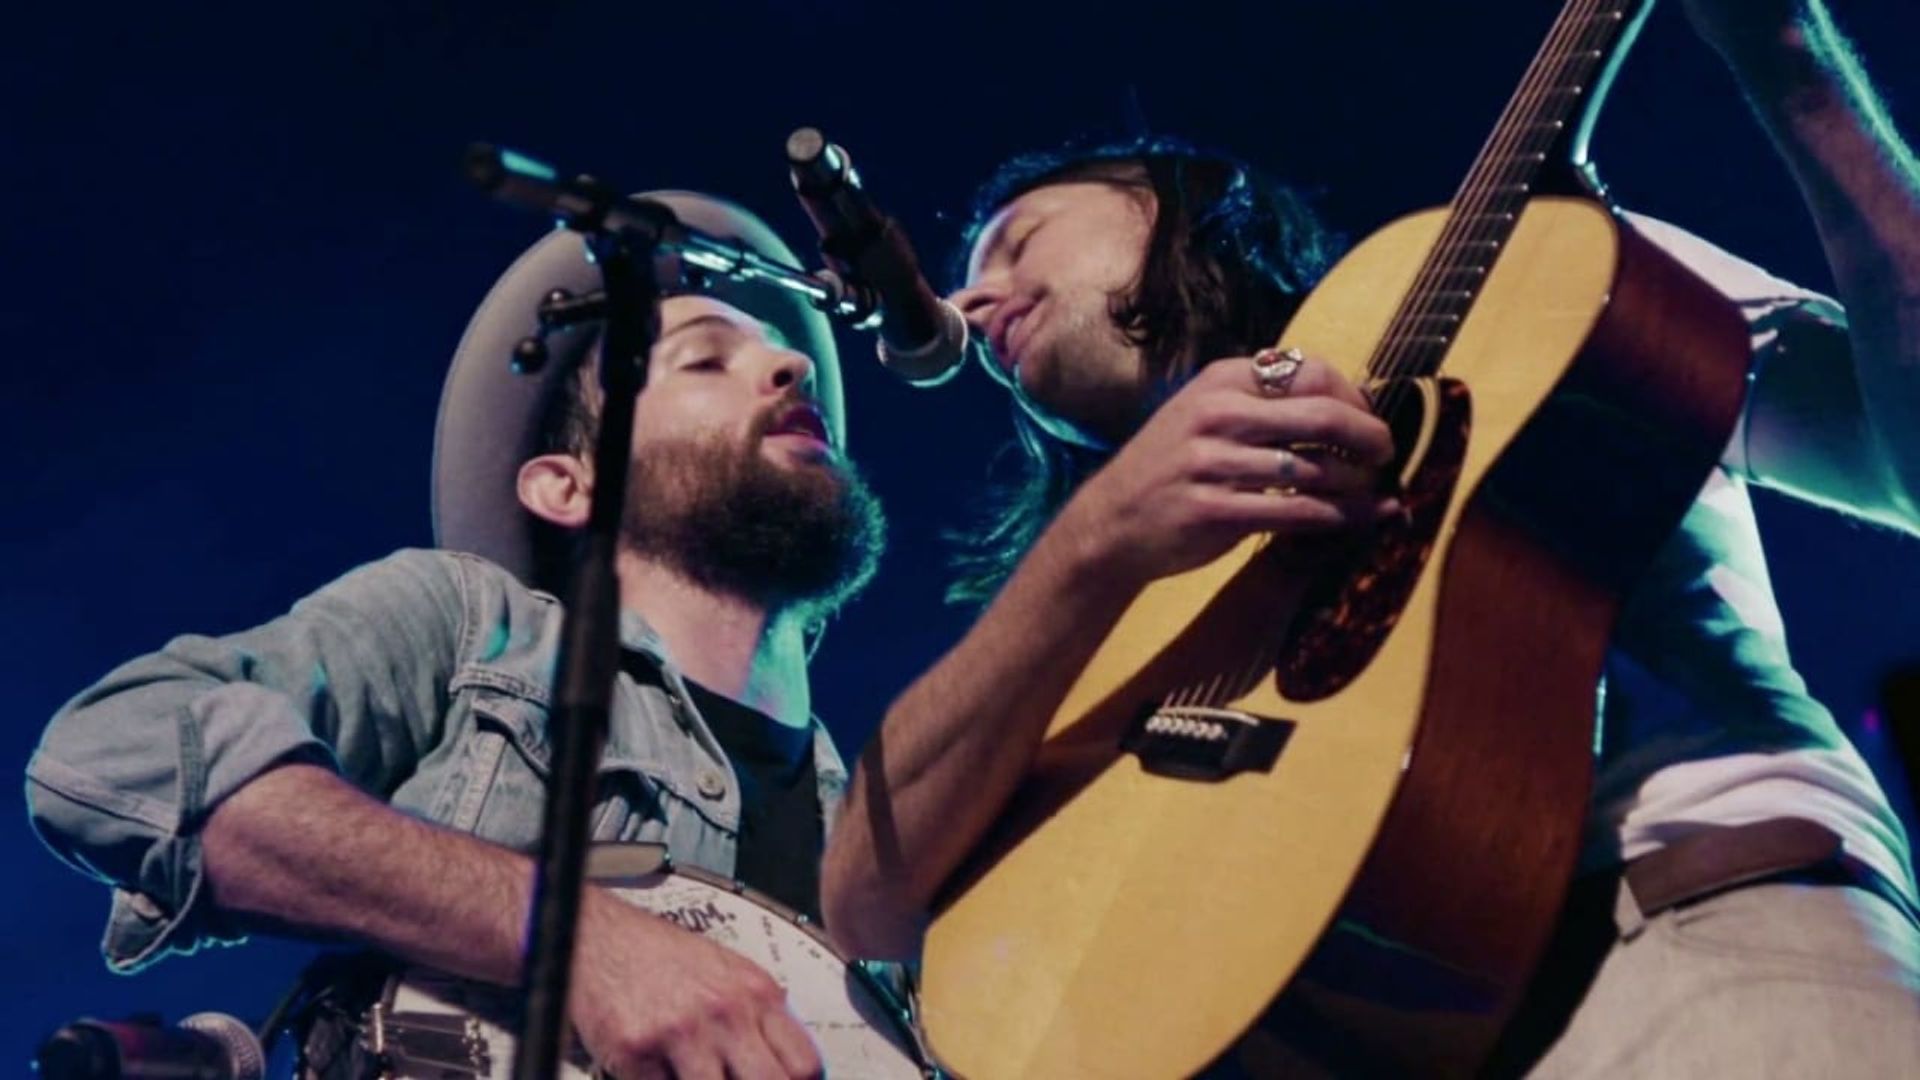 May it Last: A Portrait of the Avett Brothers background